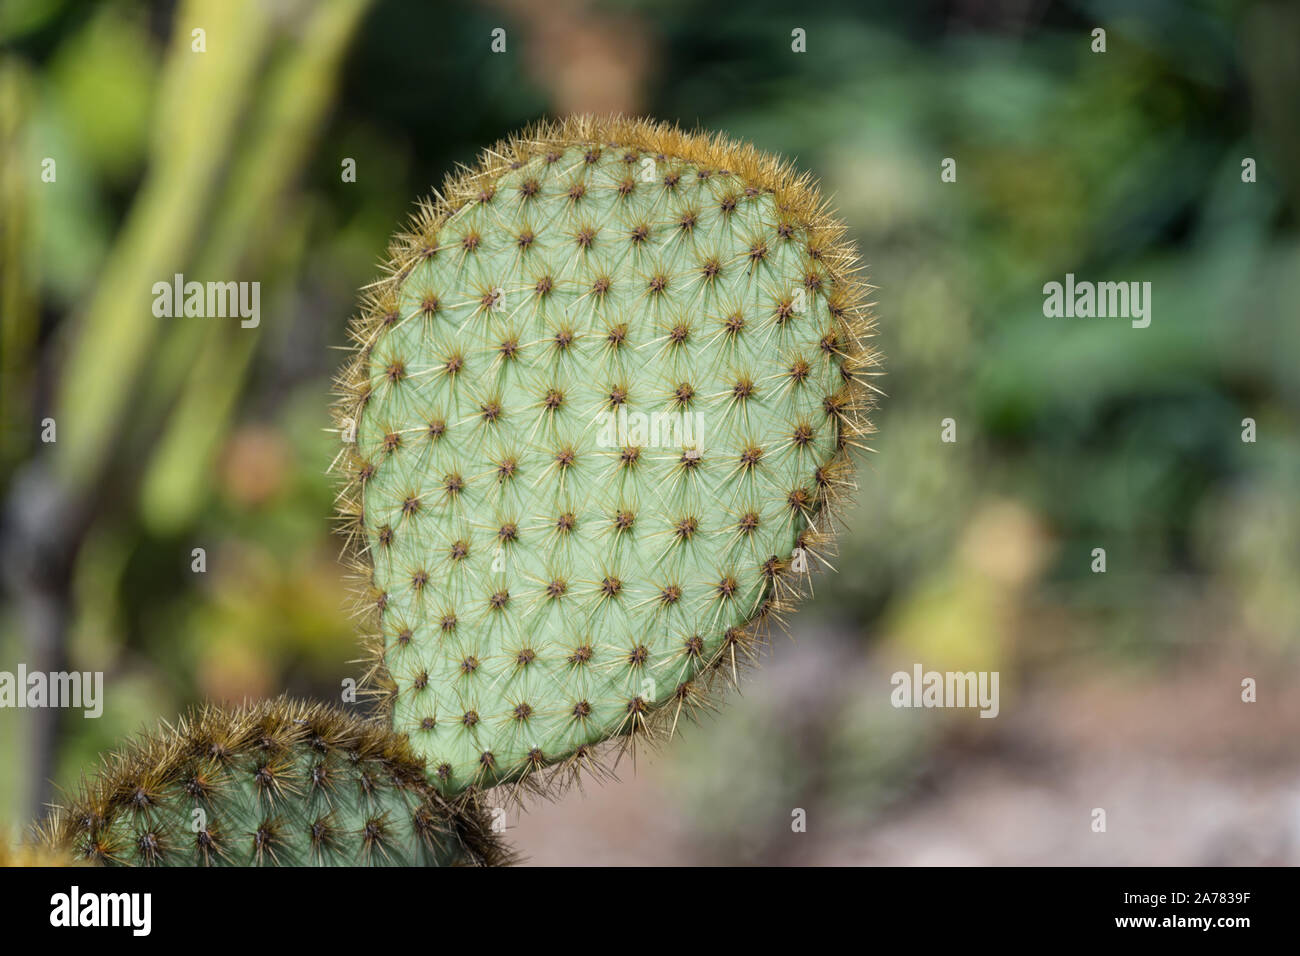 Green pads on a prickly pear cactus. Opuntia, Indian fig opuntia, barbary fig, ficus-indica, cactus pear and spineless cactus in the botanical garden Stock Photo